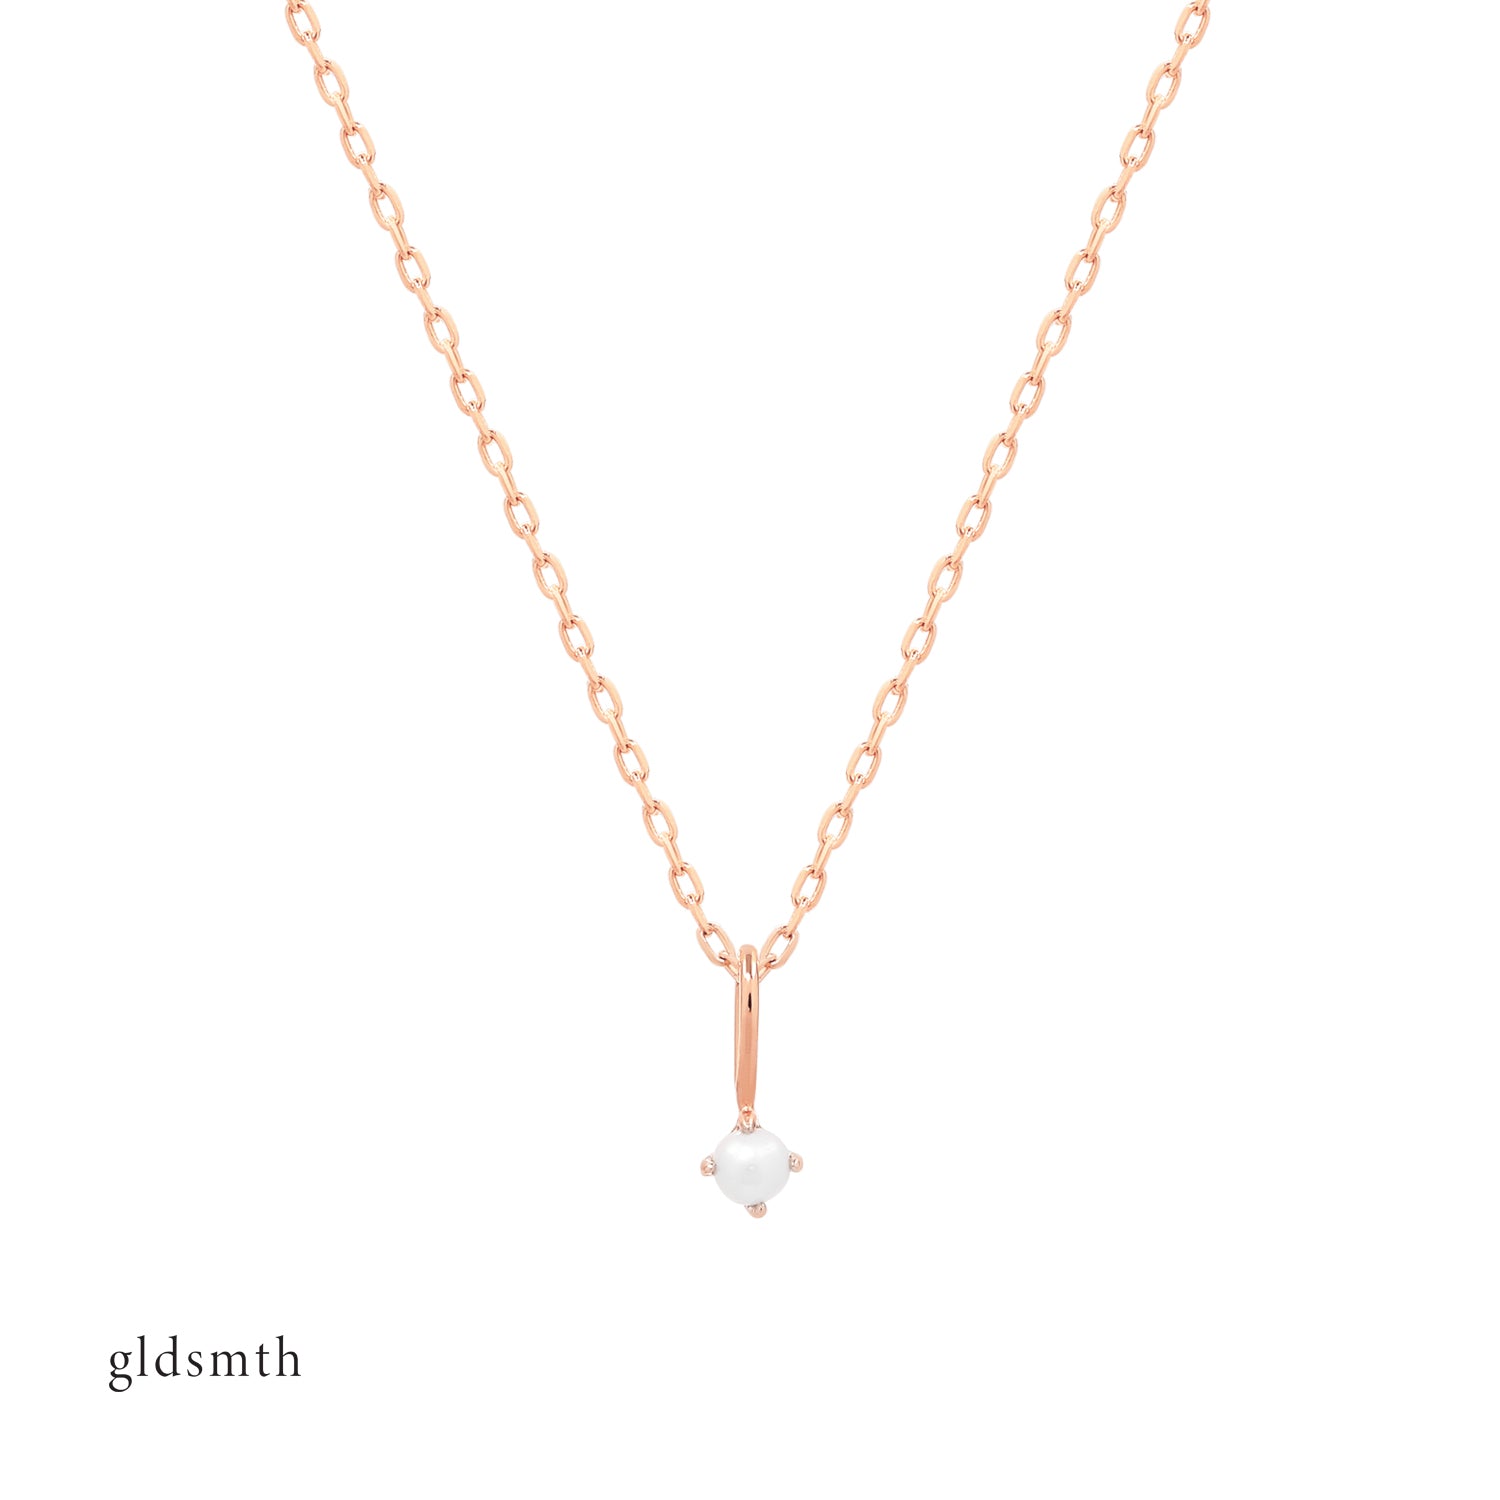 Elegant and dainty necklace. Handcrafted 14k solid rose gold necklace with white pearl